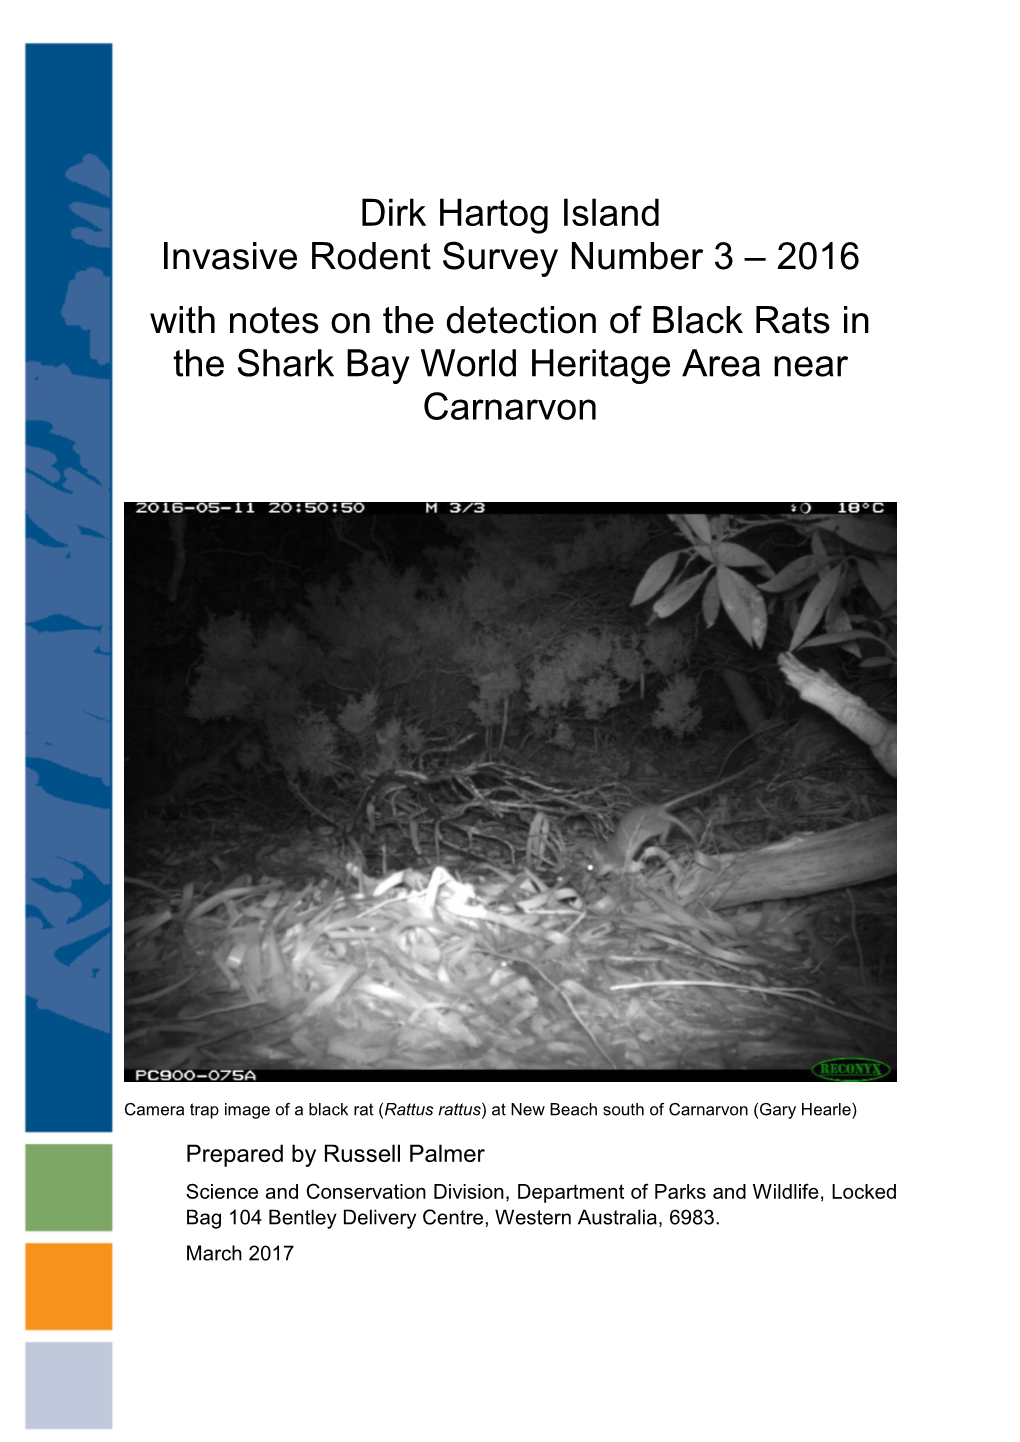 Dirk Hartog Island Invasive Rodent Survey Number 3 – 2016 with Notes on the Detection of Black Rats in the Shark Bay World Heritage Area Near Carnarvon